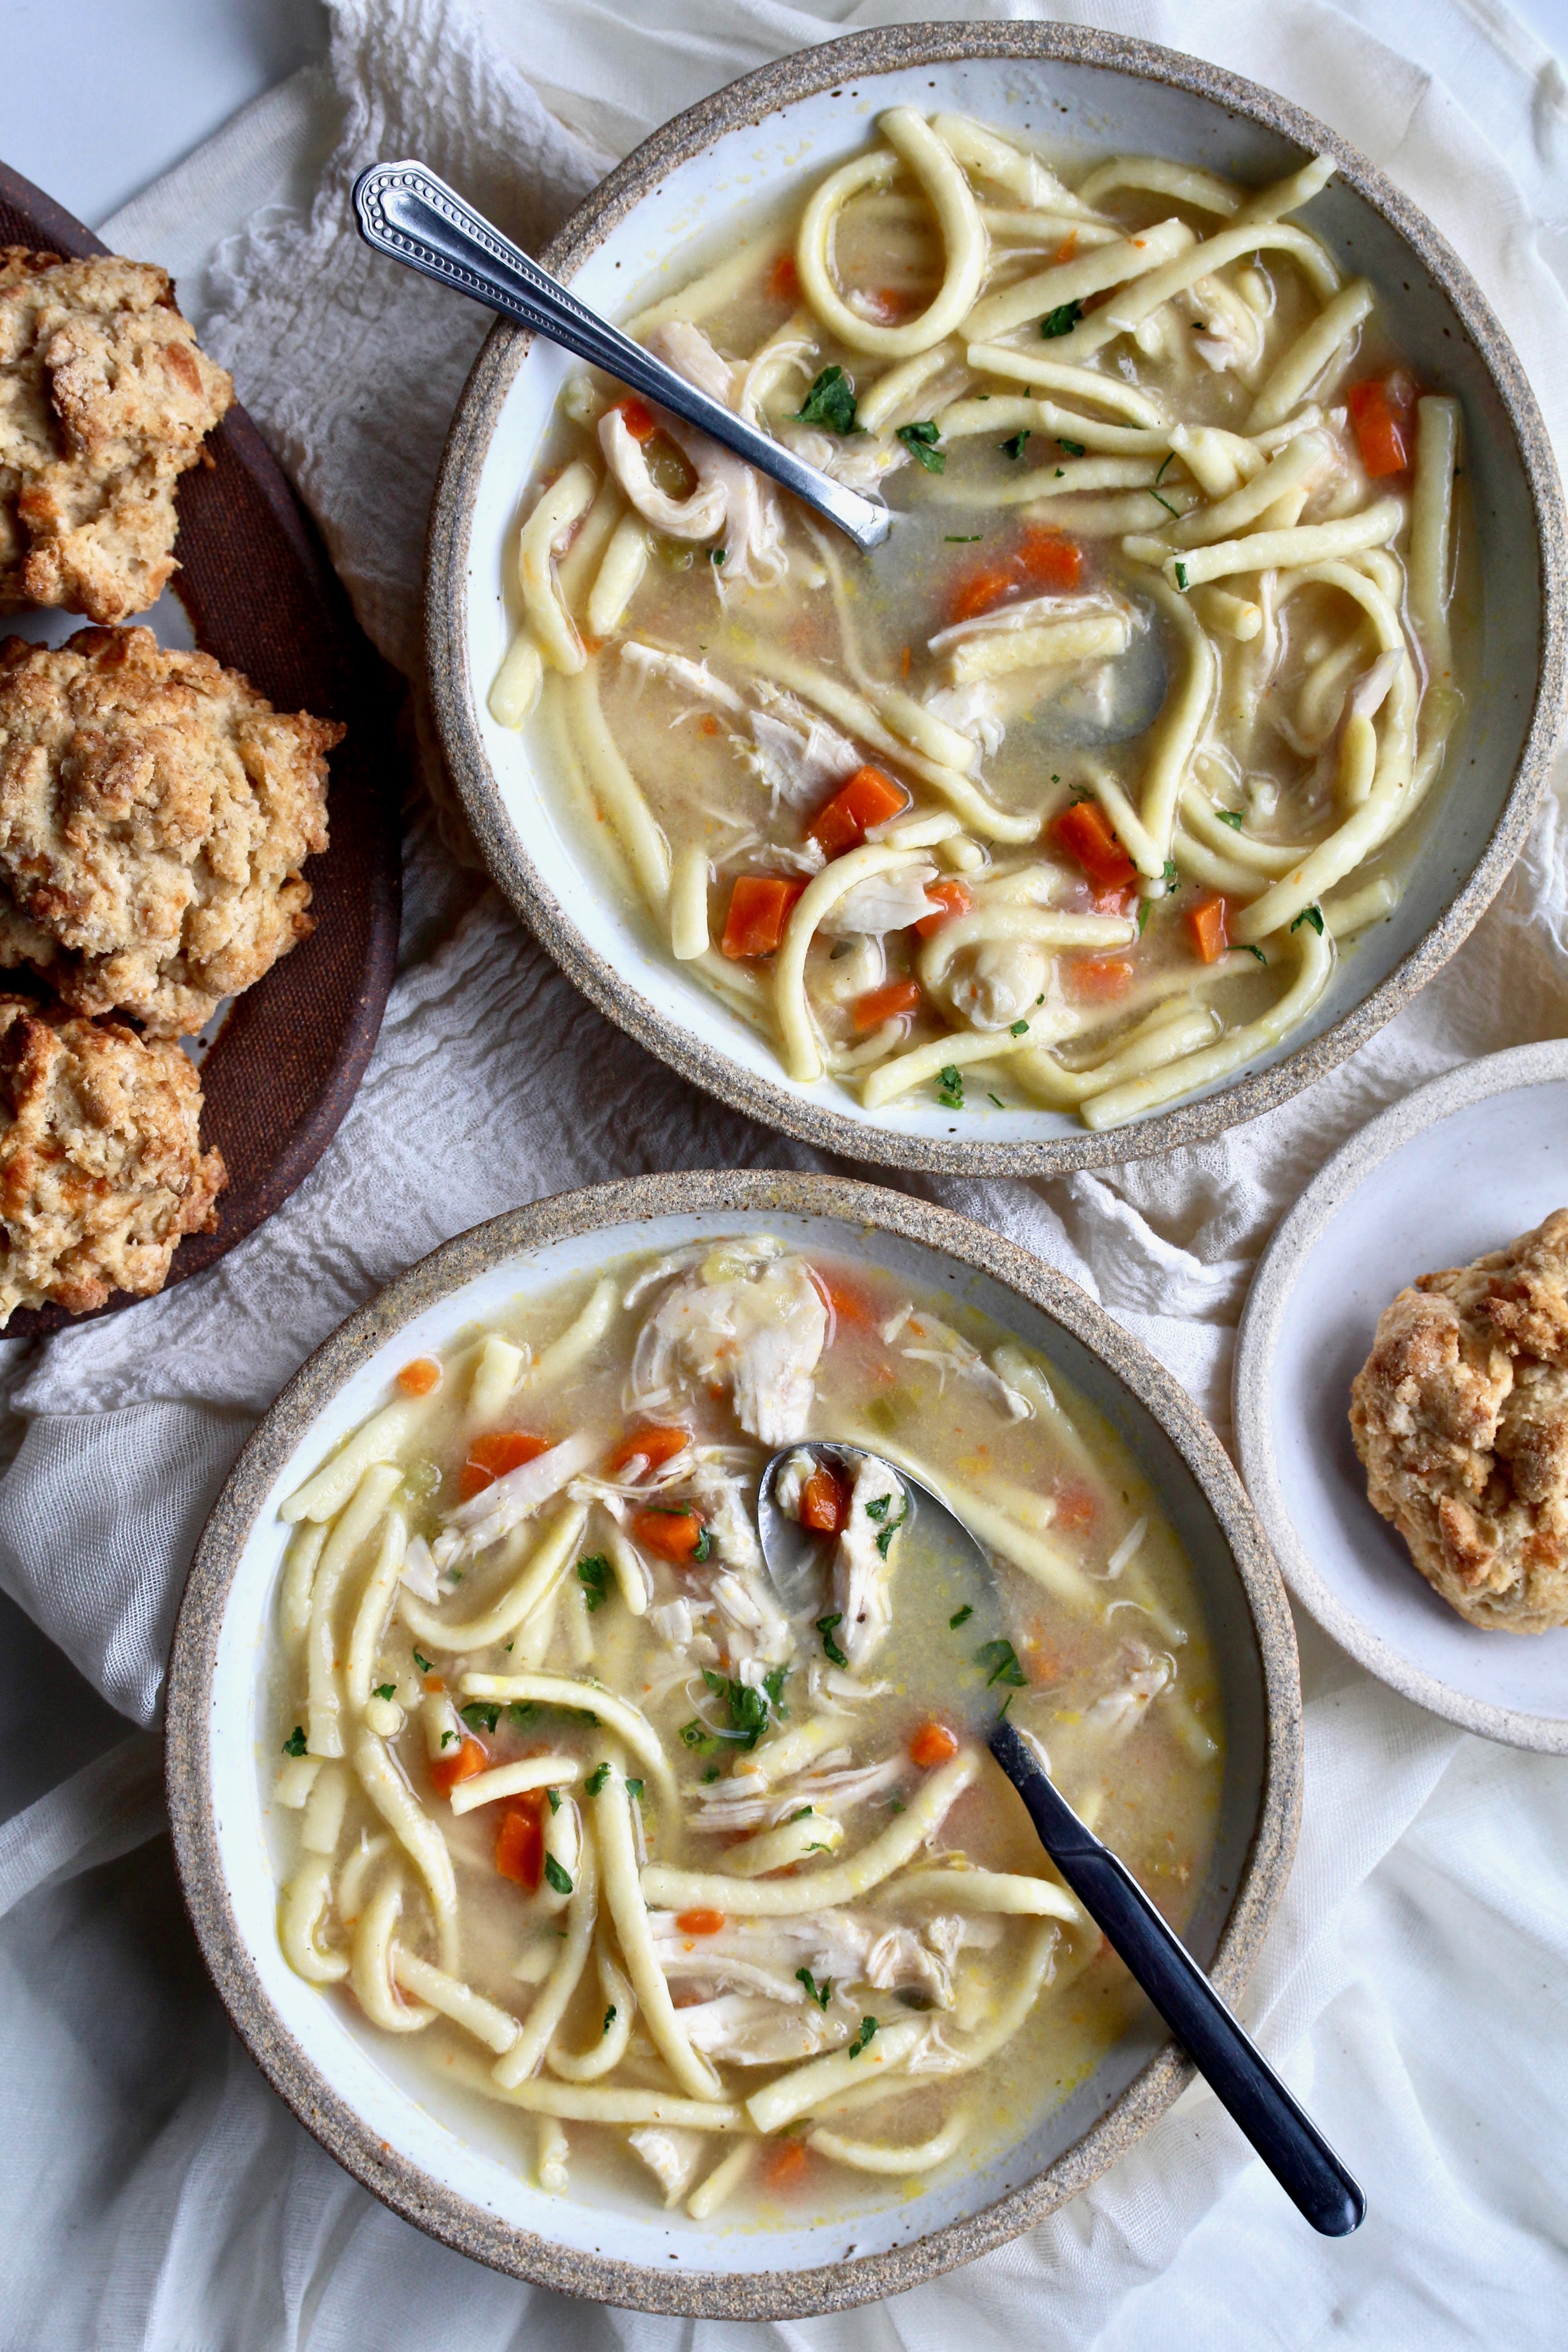 Forget the canned stuff, Homemade Chicken Noodle Soup is where it’s at! So much chicken, vegetables & yummy noodles. And it’s easier to make than you might think! @cookinRD | sarahaasrdn.com 